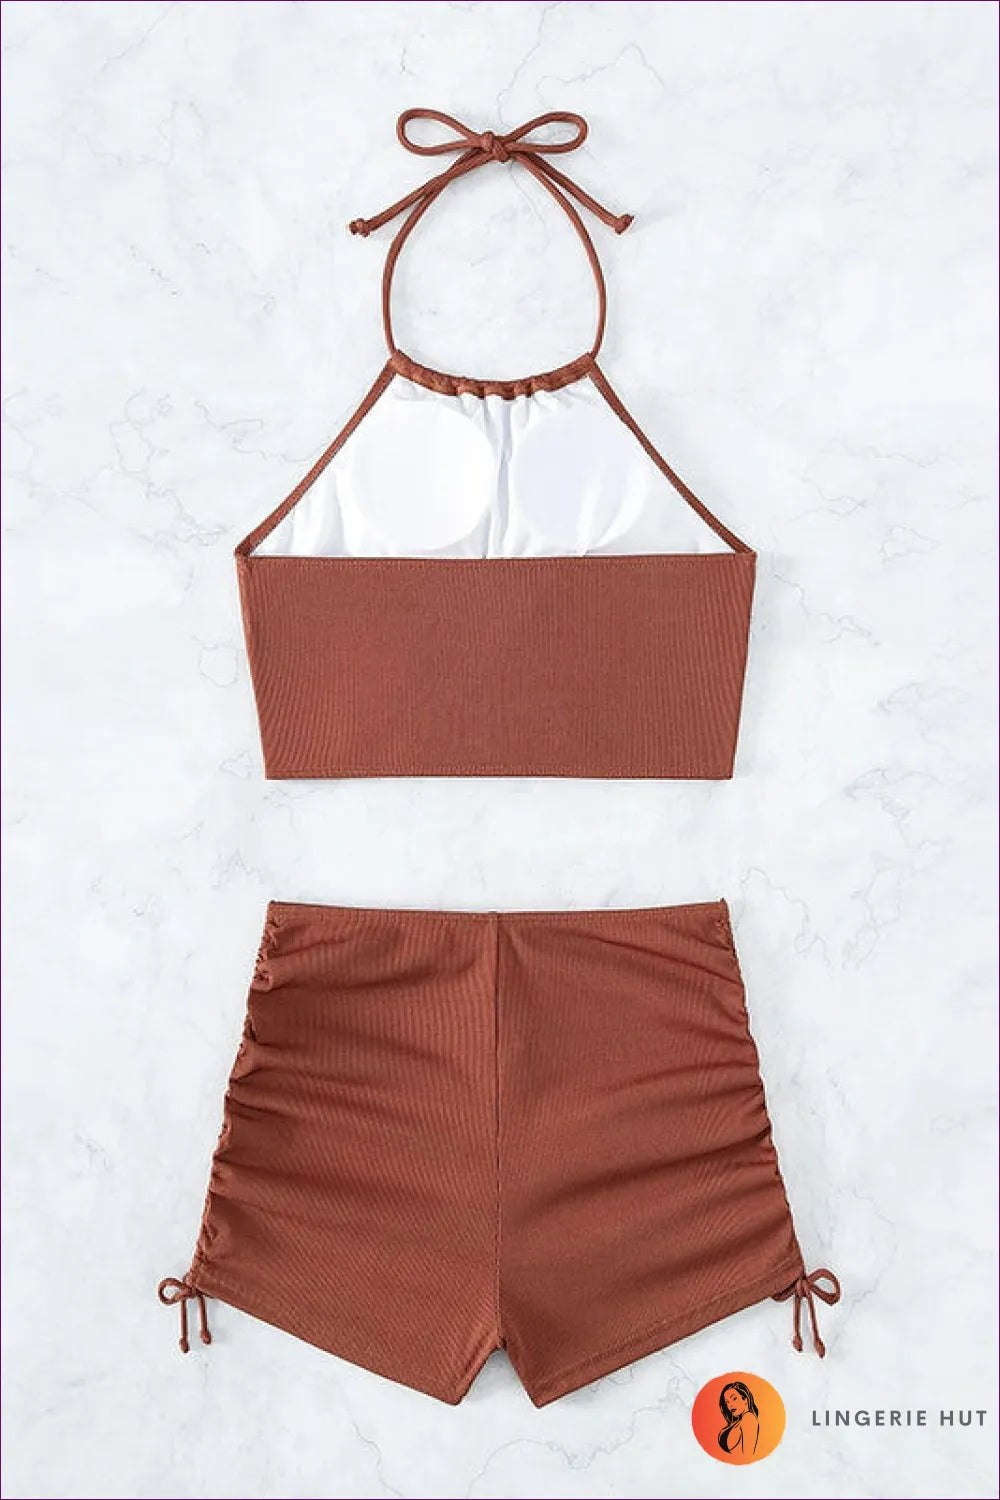 Revolutionize Your Beach Style With Our Sleek Sling Swimsuit. Modern Chic Meets Comfort The Perfect Balance